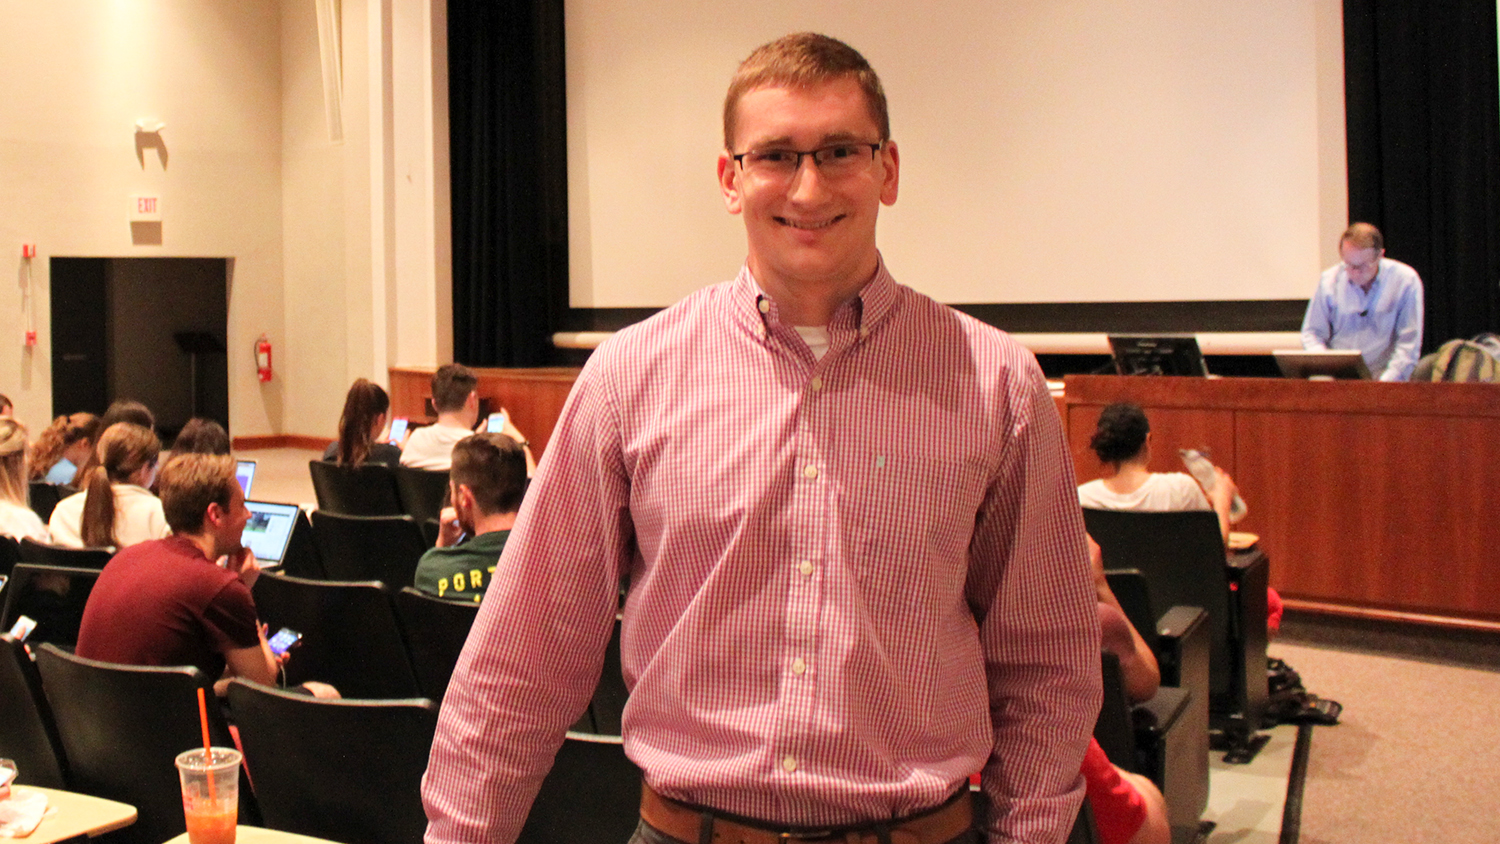 Photo of James Barrow ('17) after he gave a brief presentation at the start of a Poole College marketing class in the Nelson Hall Auditorium on what he learned while writing his book, "No Time to Lose..."